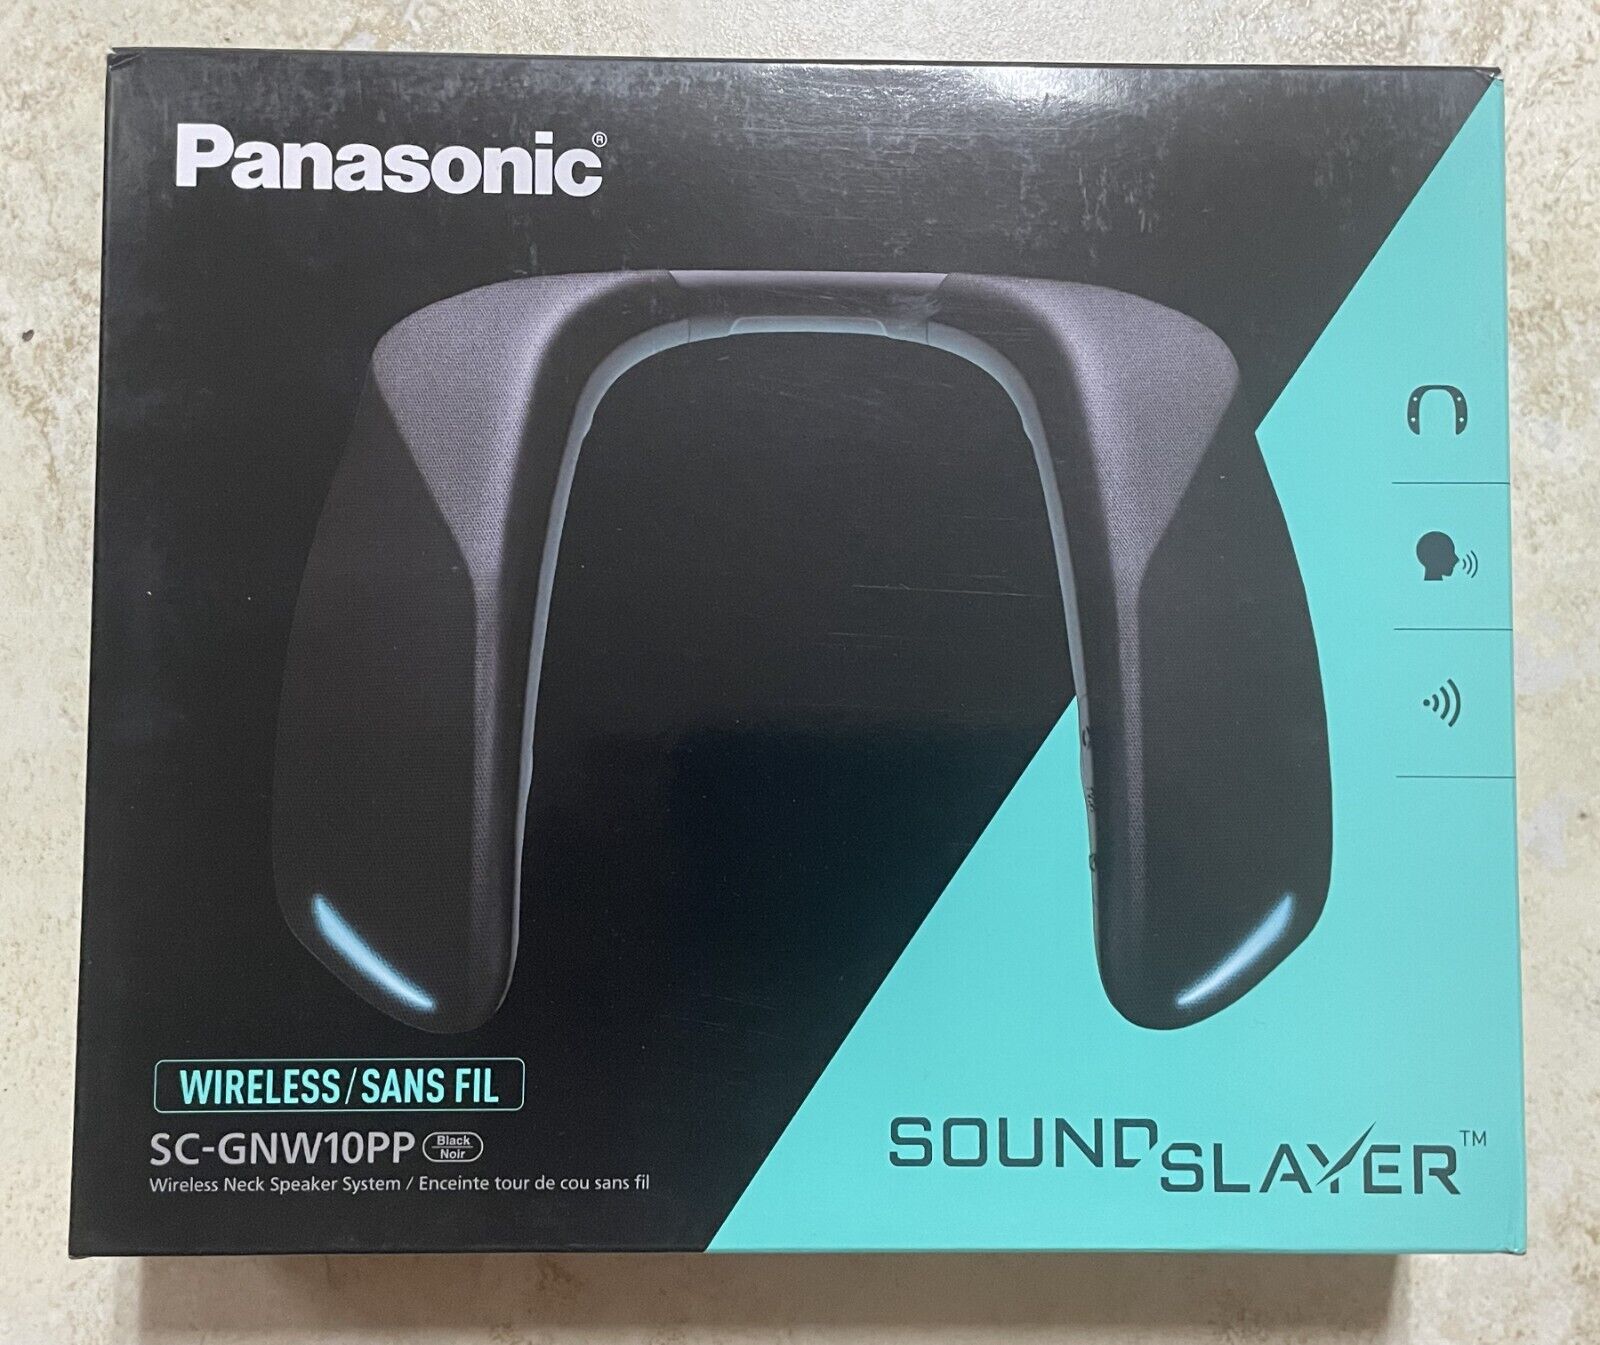 Panasonic SoundSlayer Wireless Wearable Speaker System for Gaming, Movies Etc.